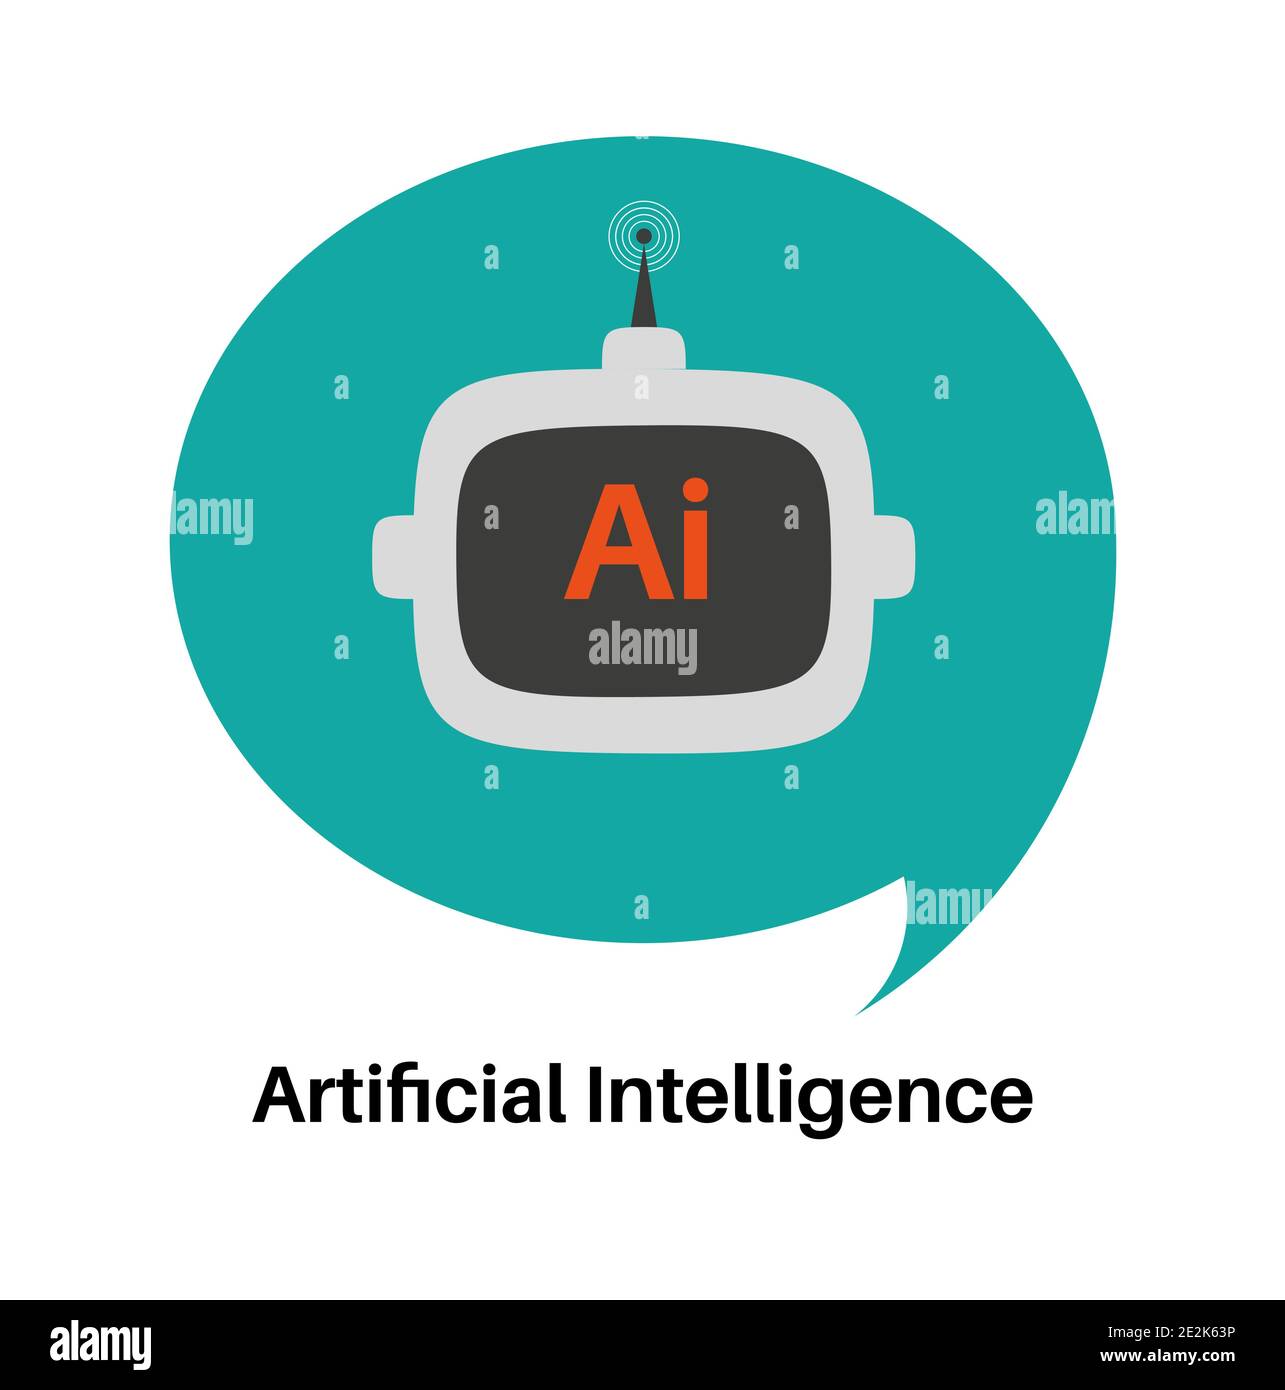 Artificial intelligence for chat